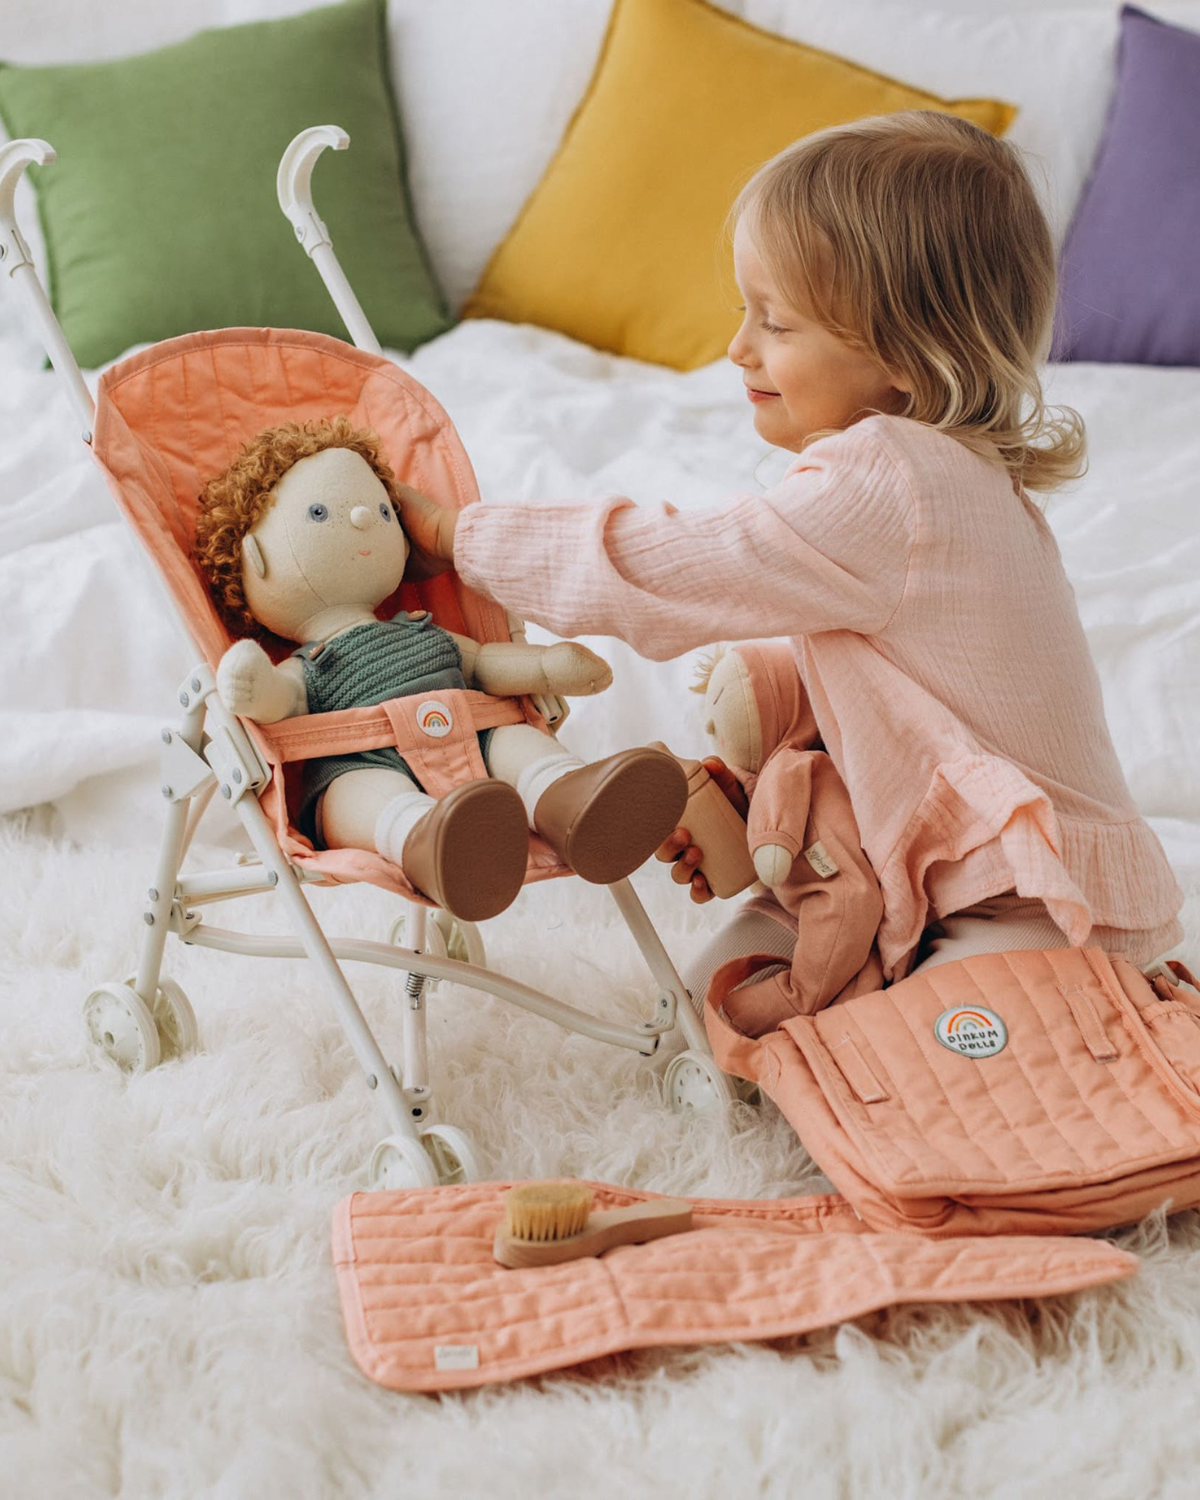 Rose Doll Sollie Stroller: Playful and Cute